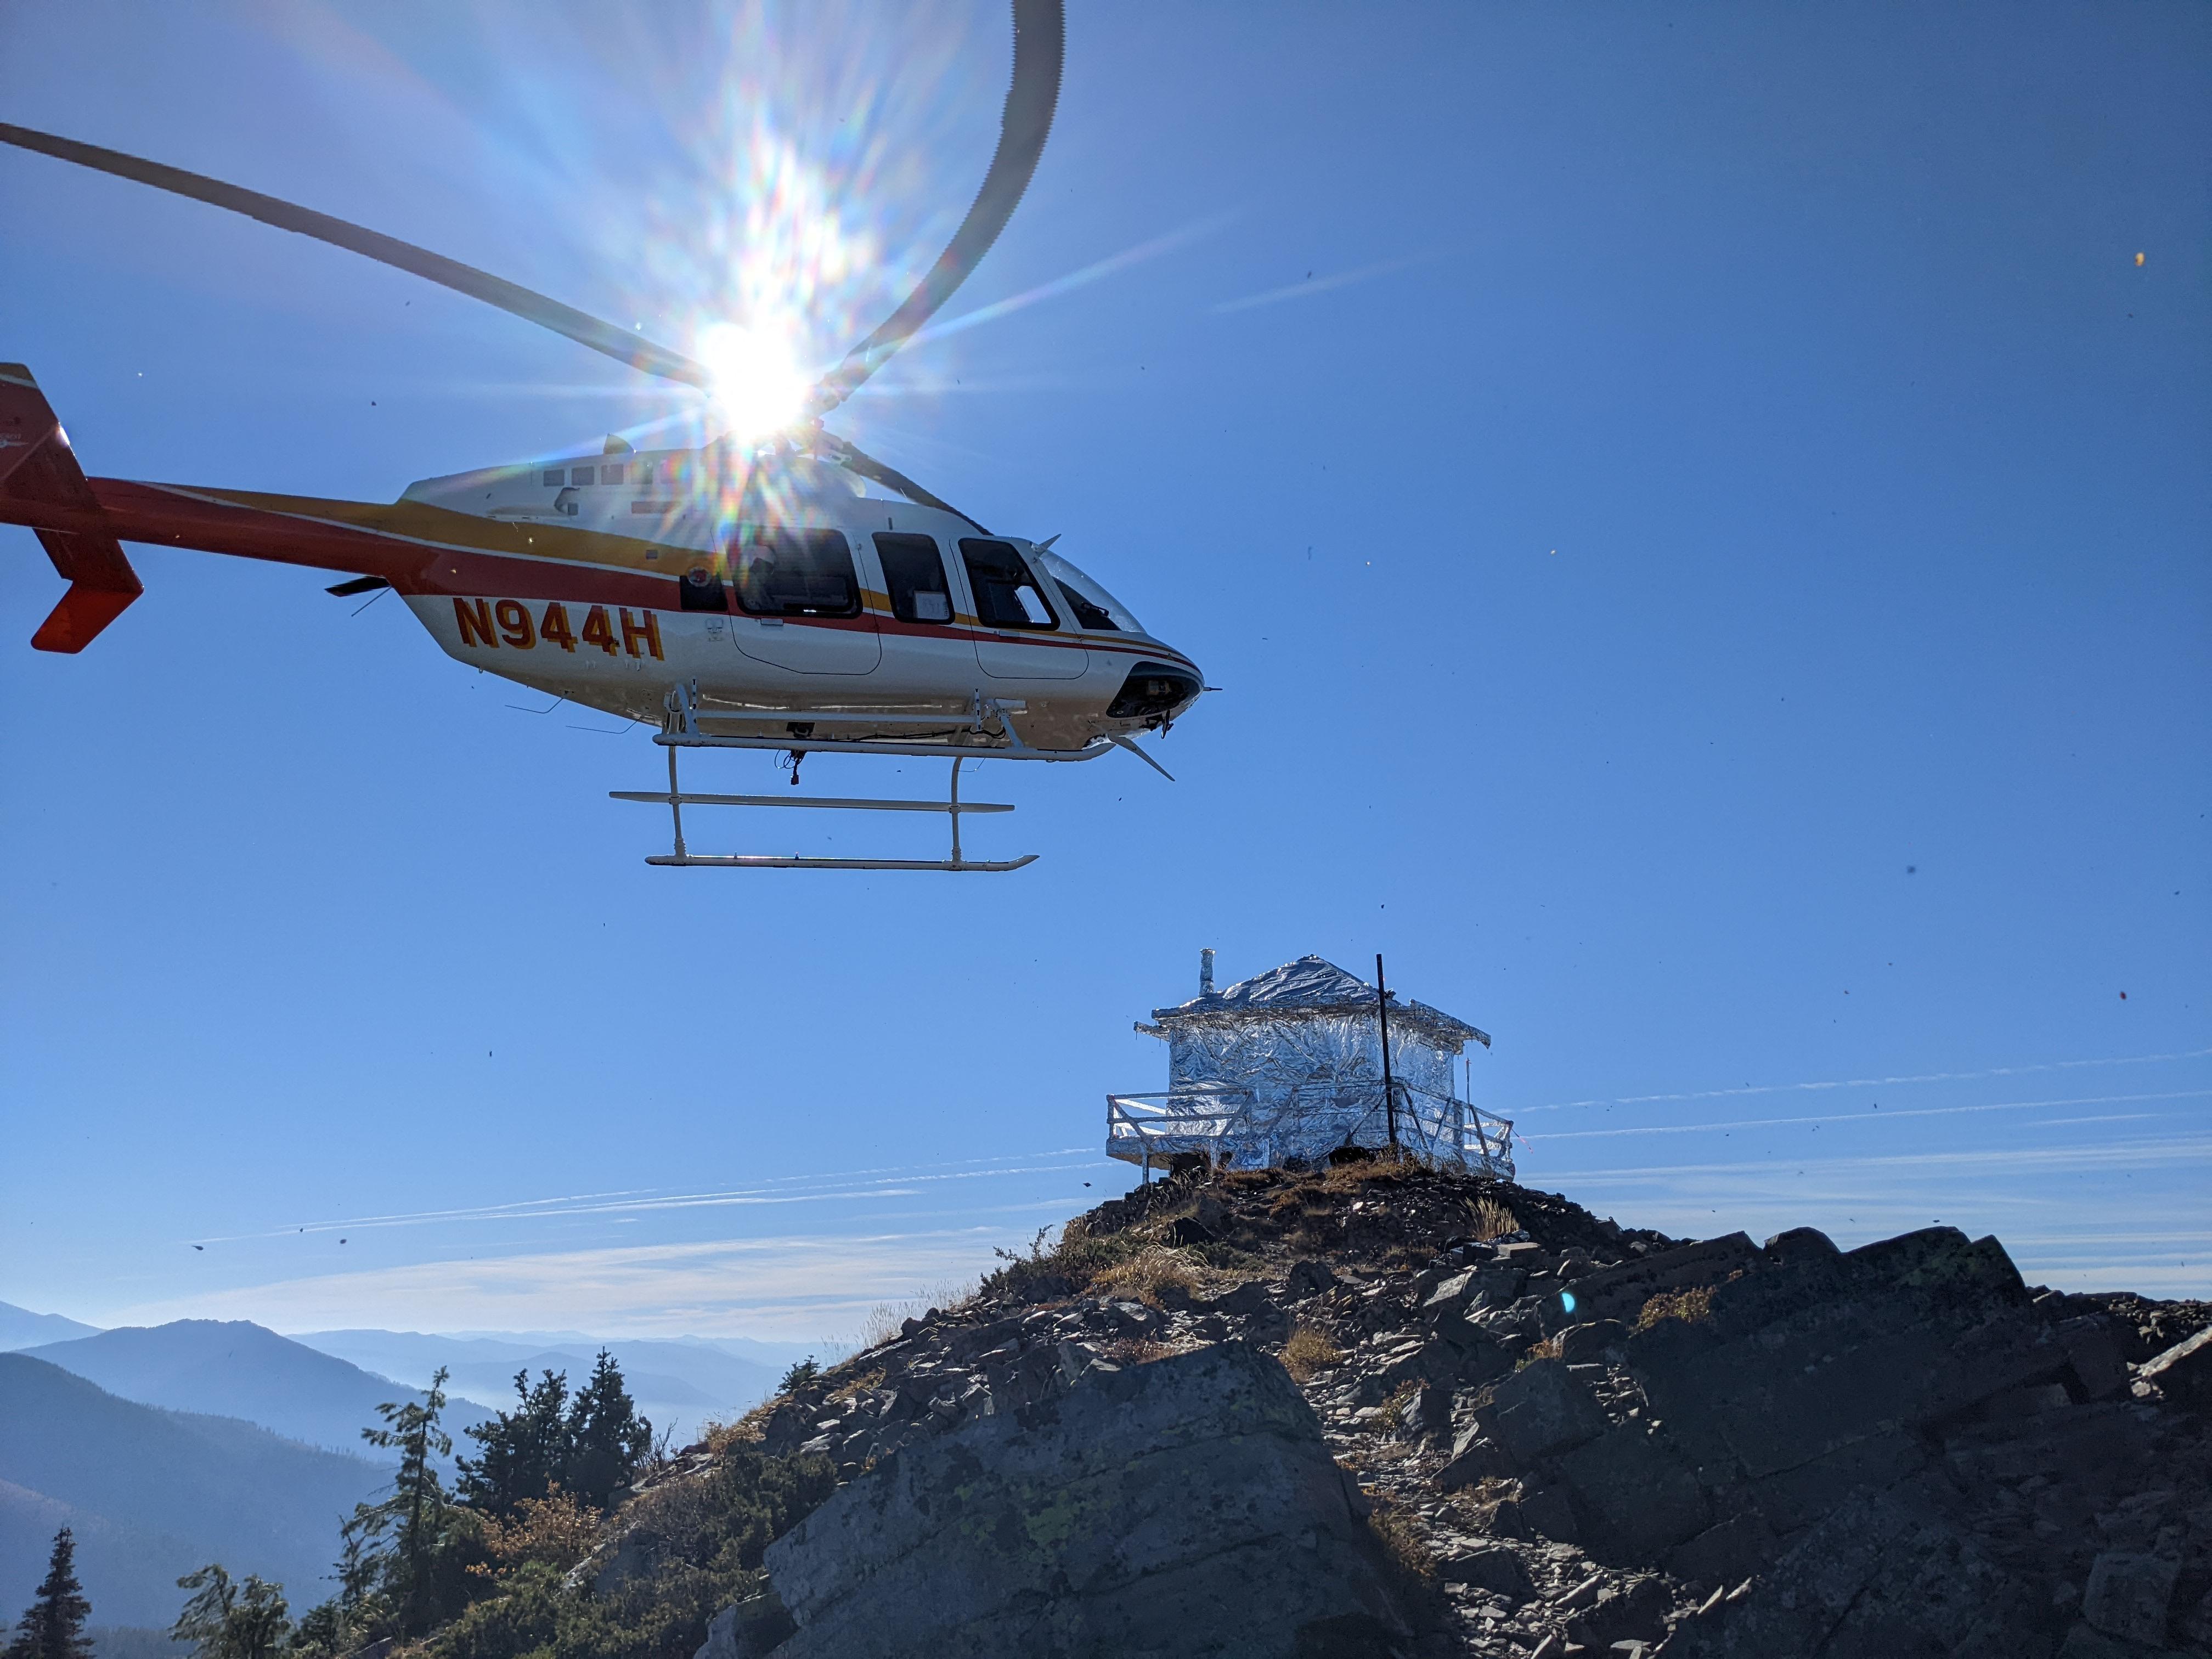 Helicopter approaching Star Peak Lookout, which is wrapped